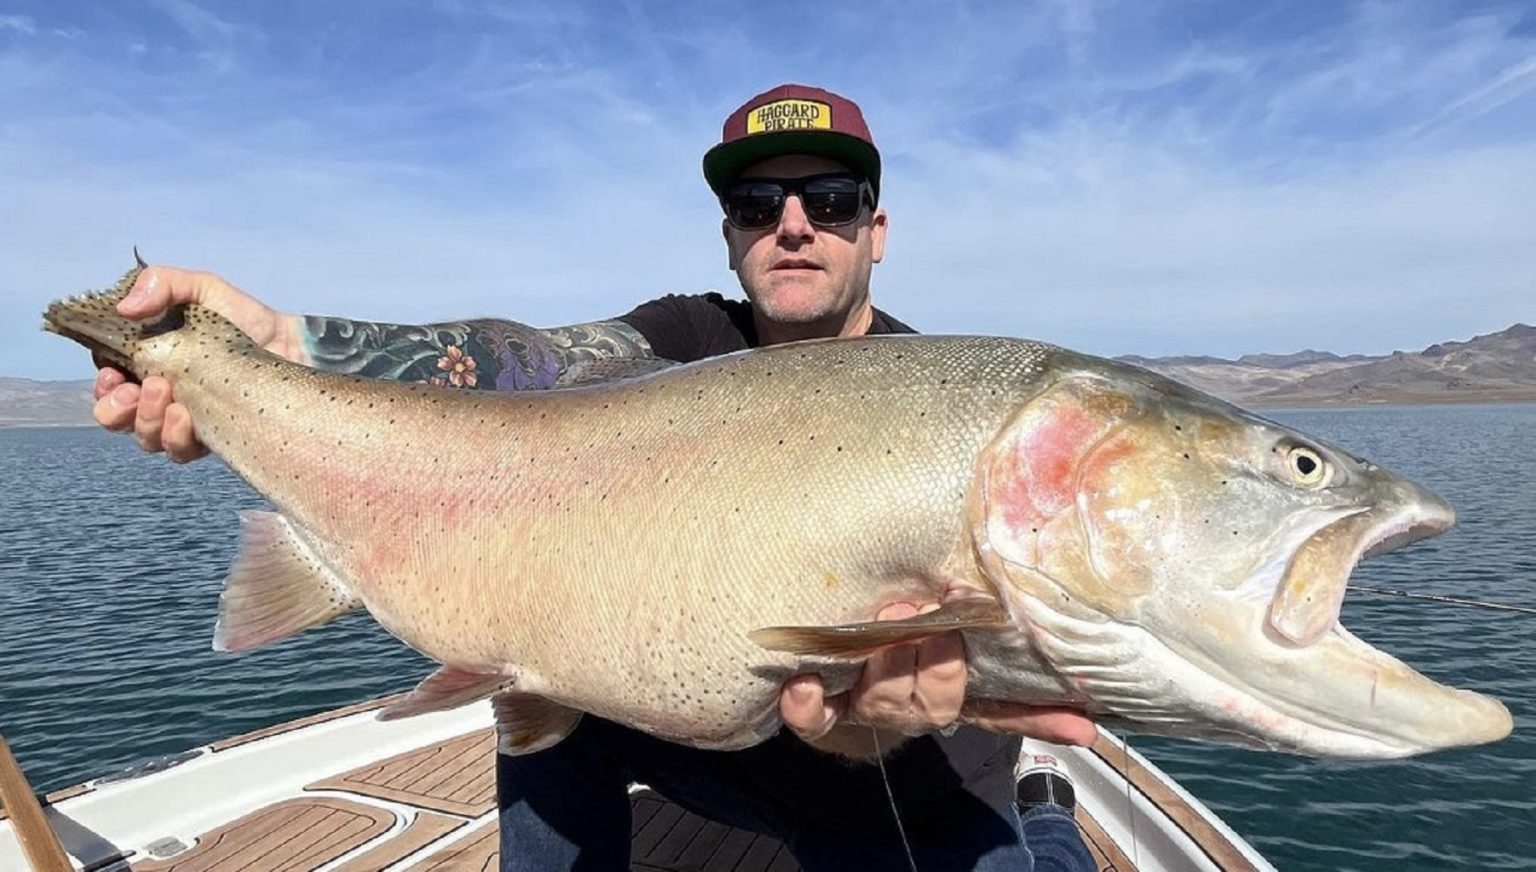 Pyramid Lake Fishing Guides - Giant Lahontan Cutthroat Trout 20 lbs